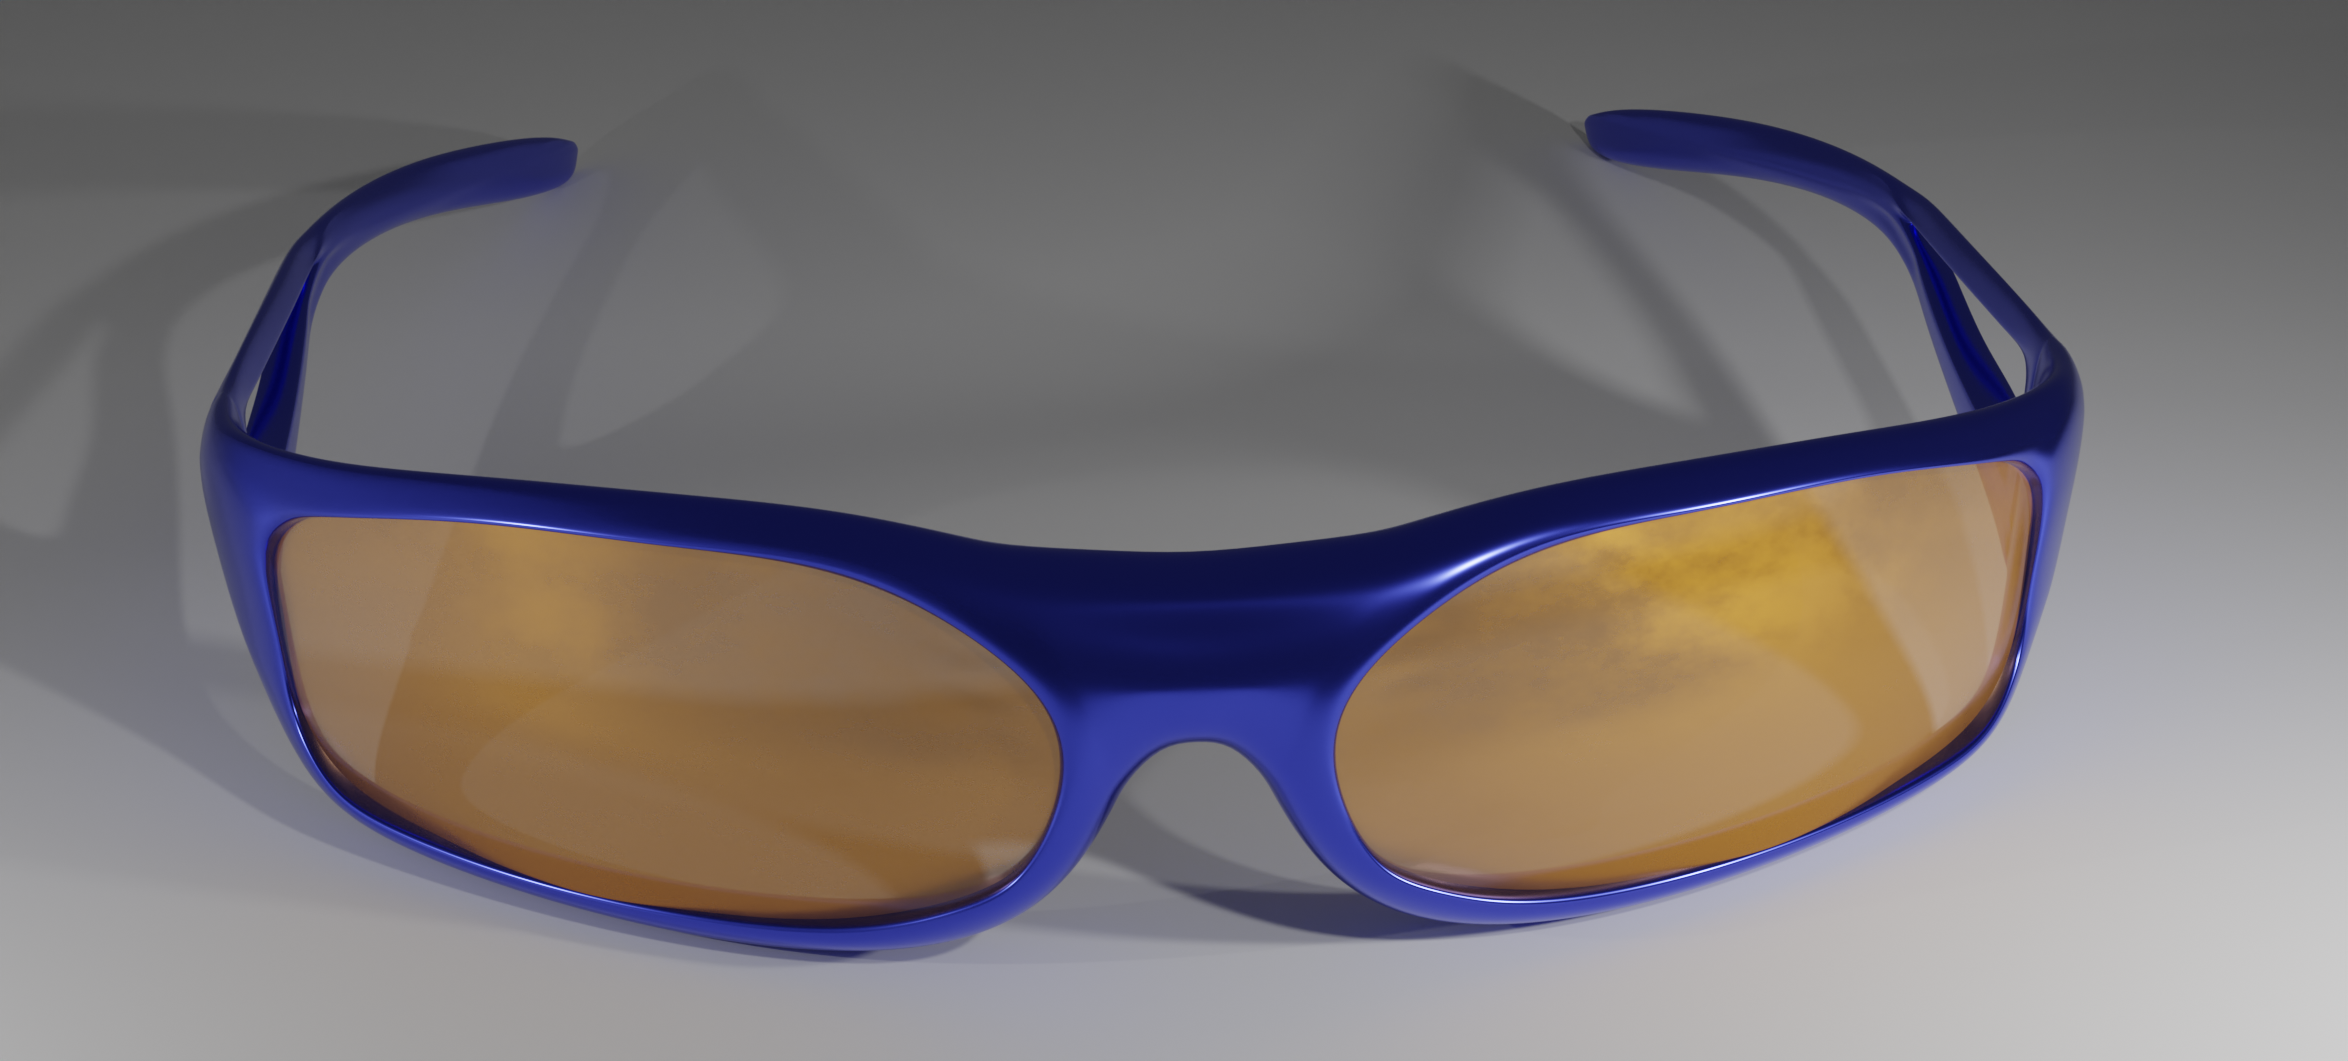 Blue sports glasses  preview image 1